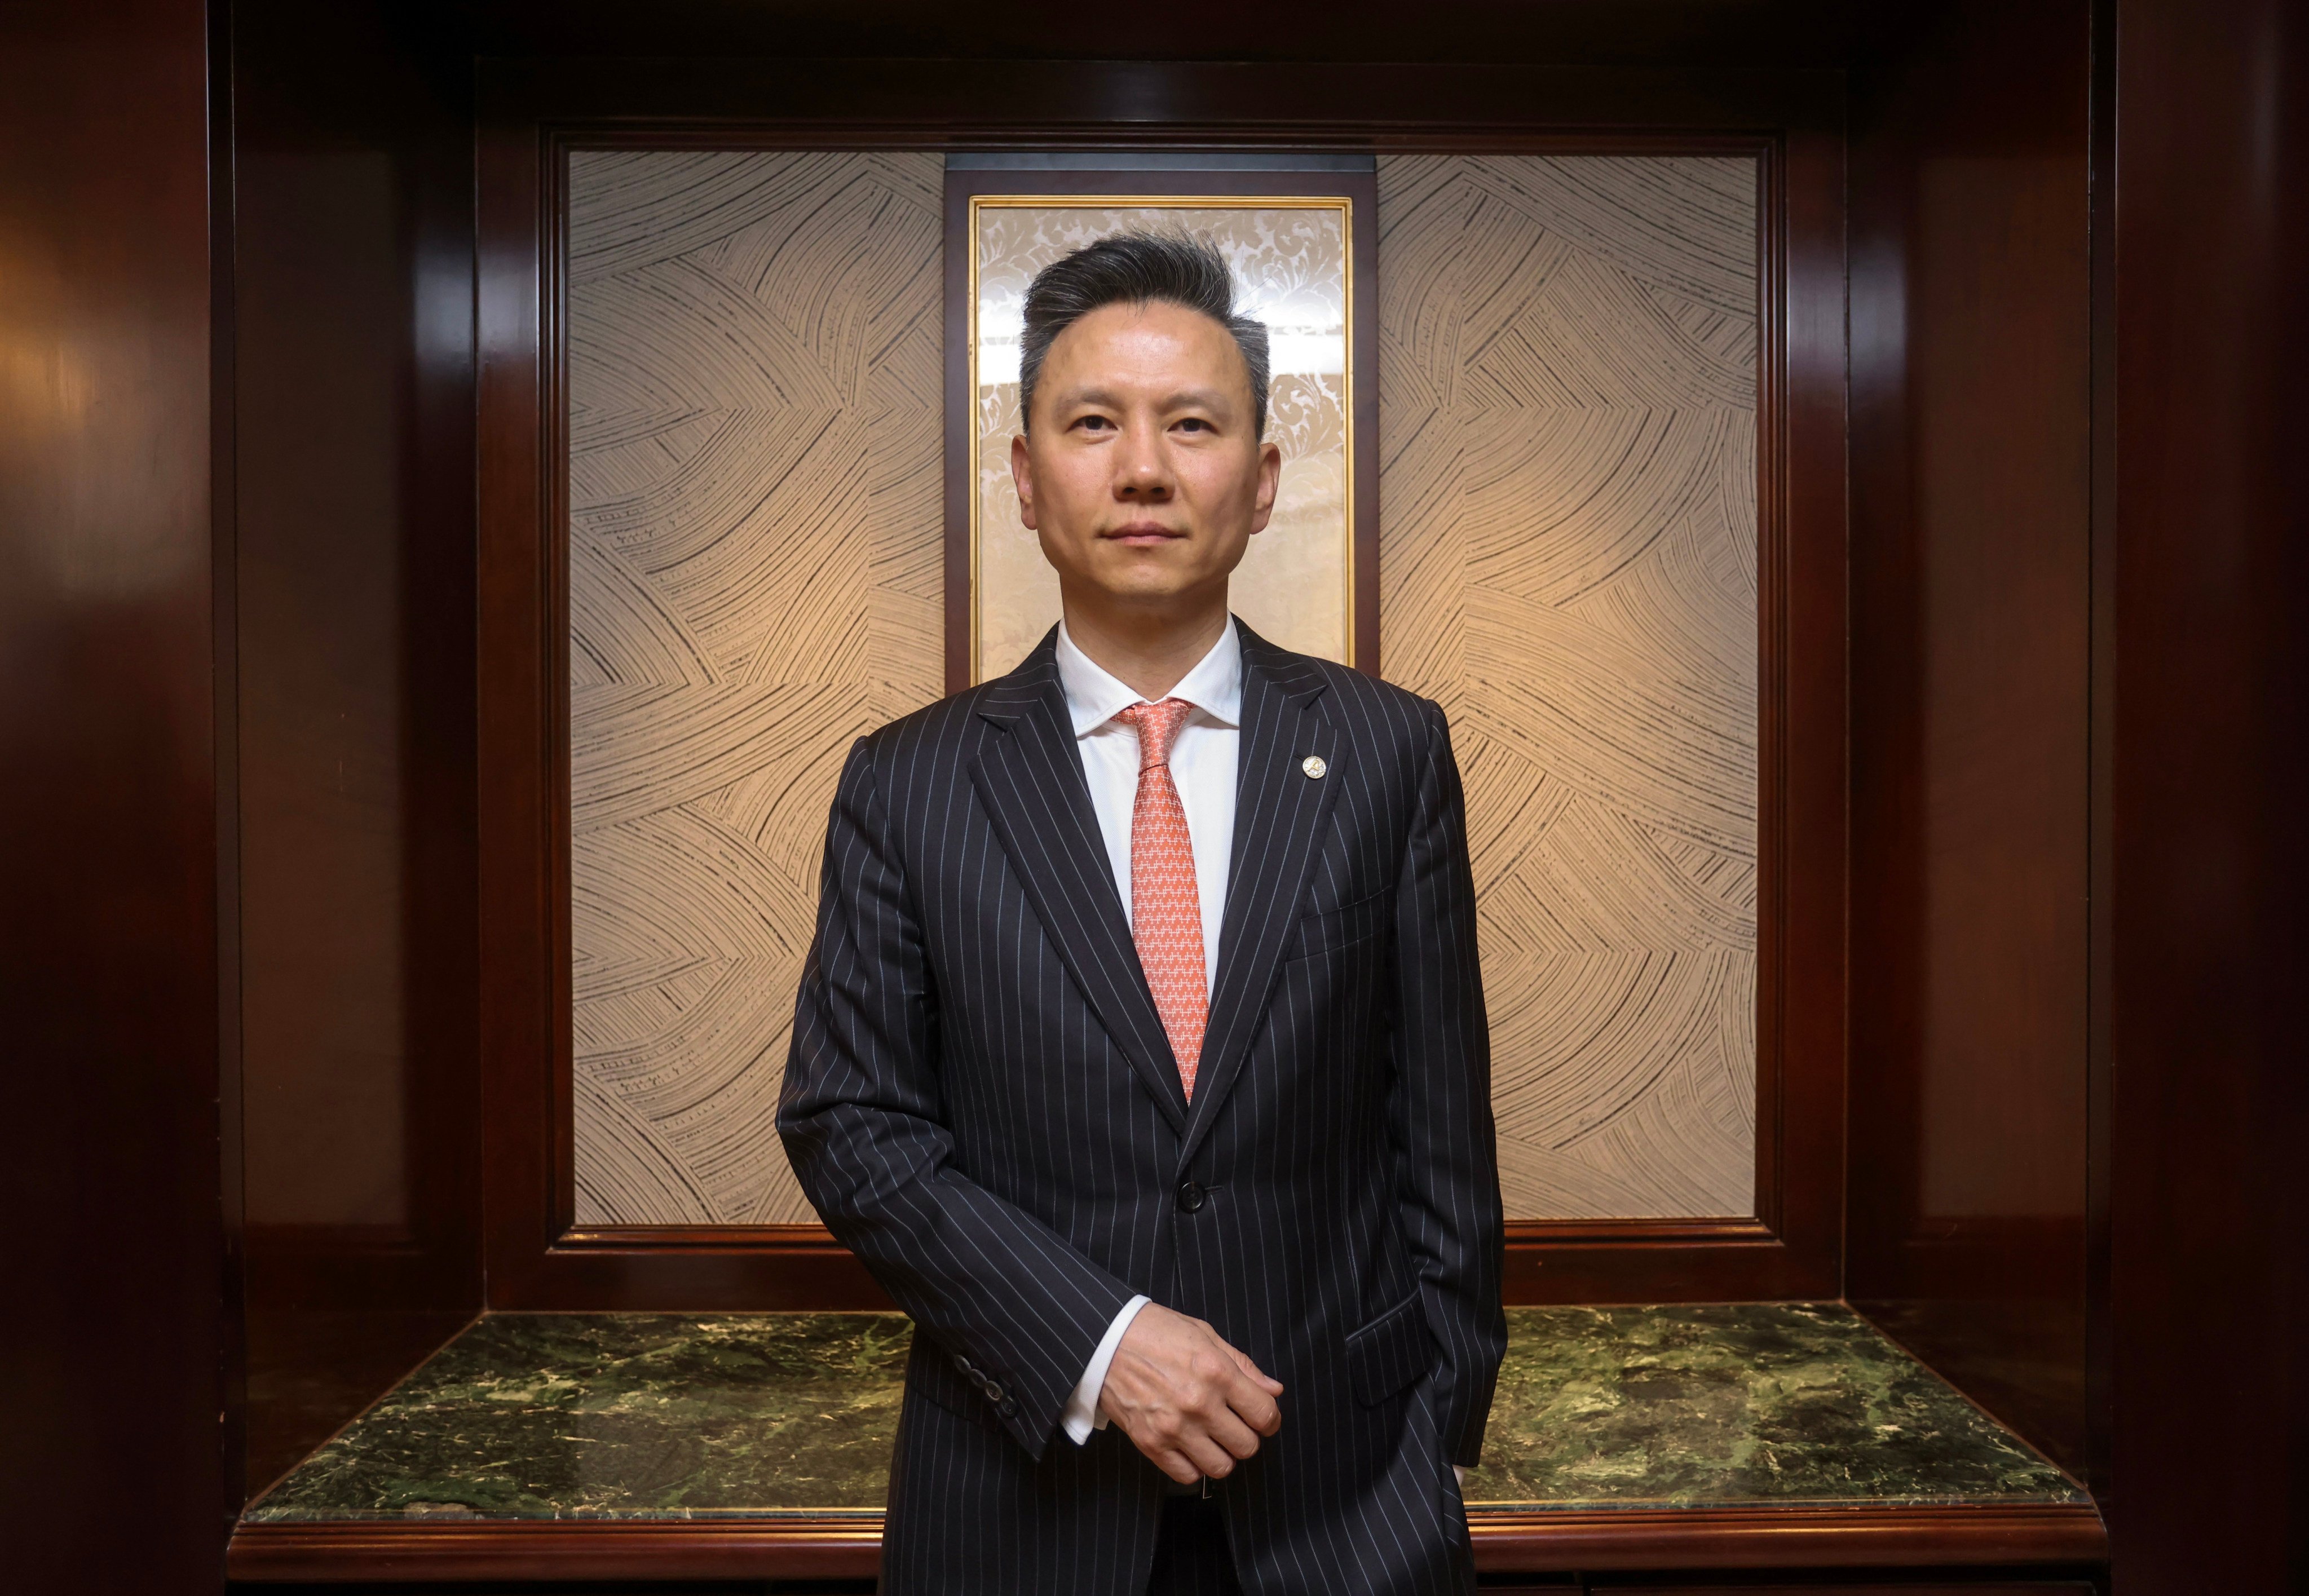 ‘Technology is a key enabler of our business,’ Ping An’s Michael Guo says. Photo: Jonathan Wong